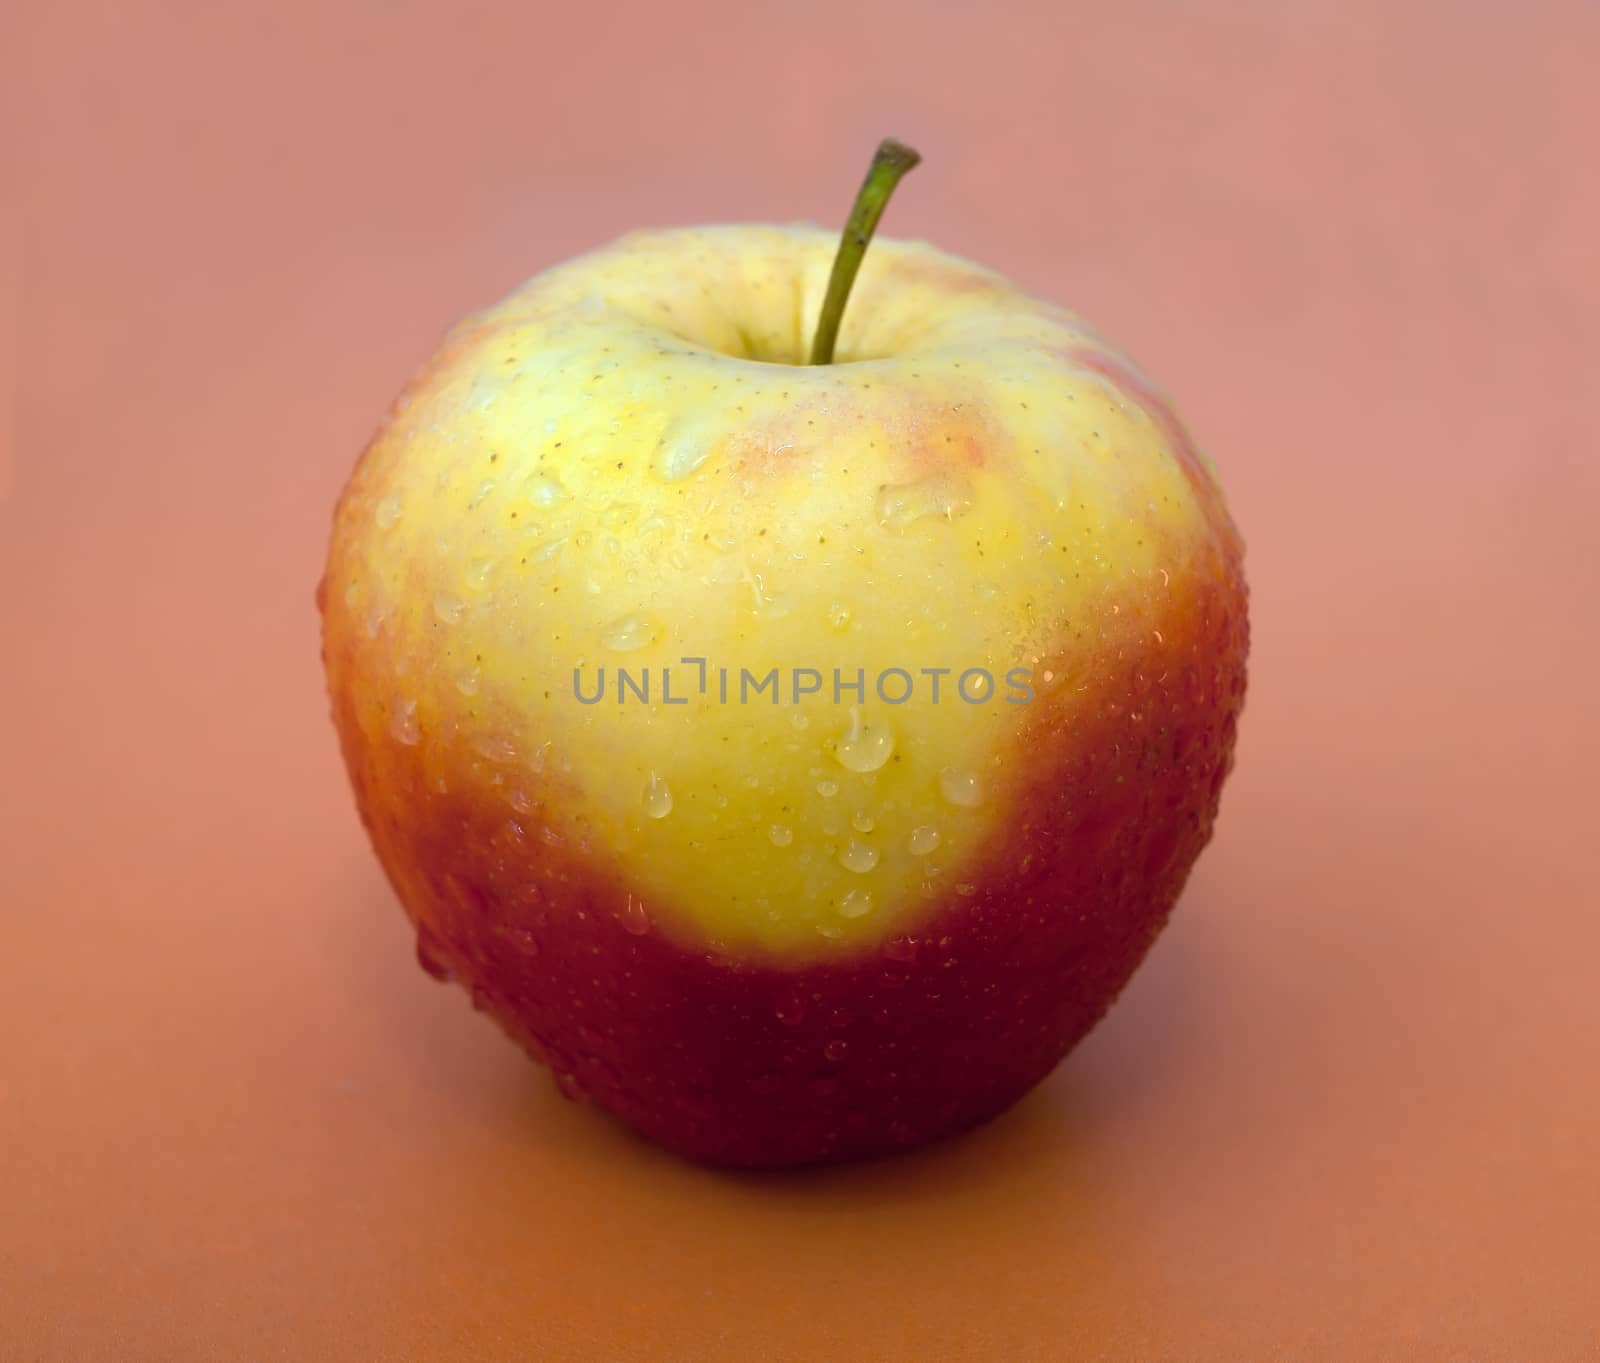 Red-yellow apple close up on an orange background with water drops on it